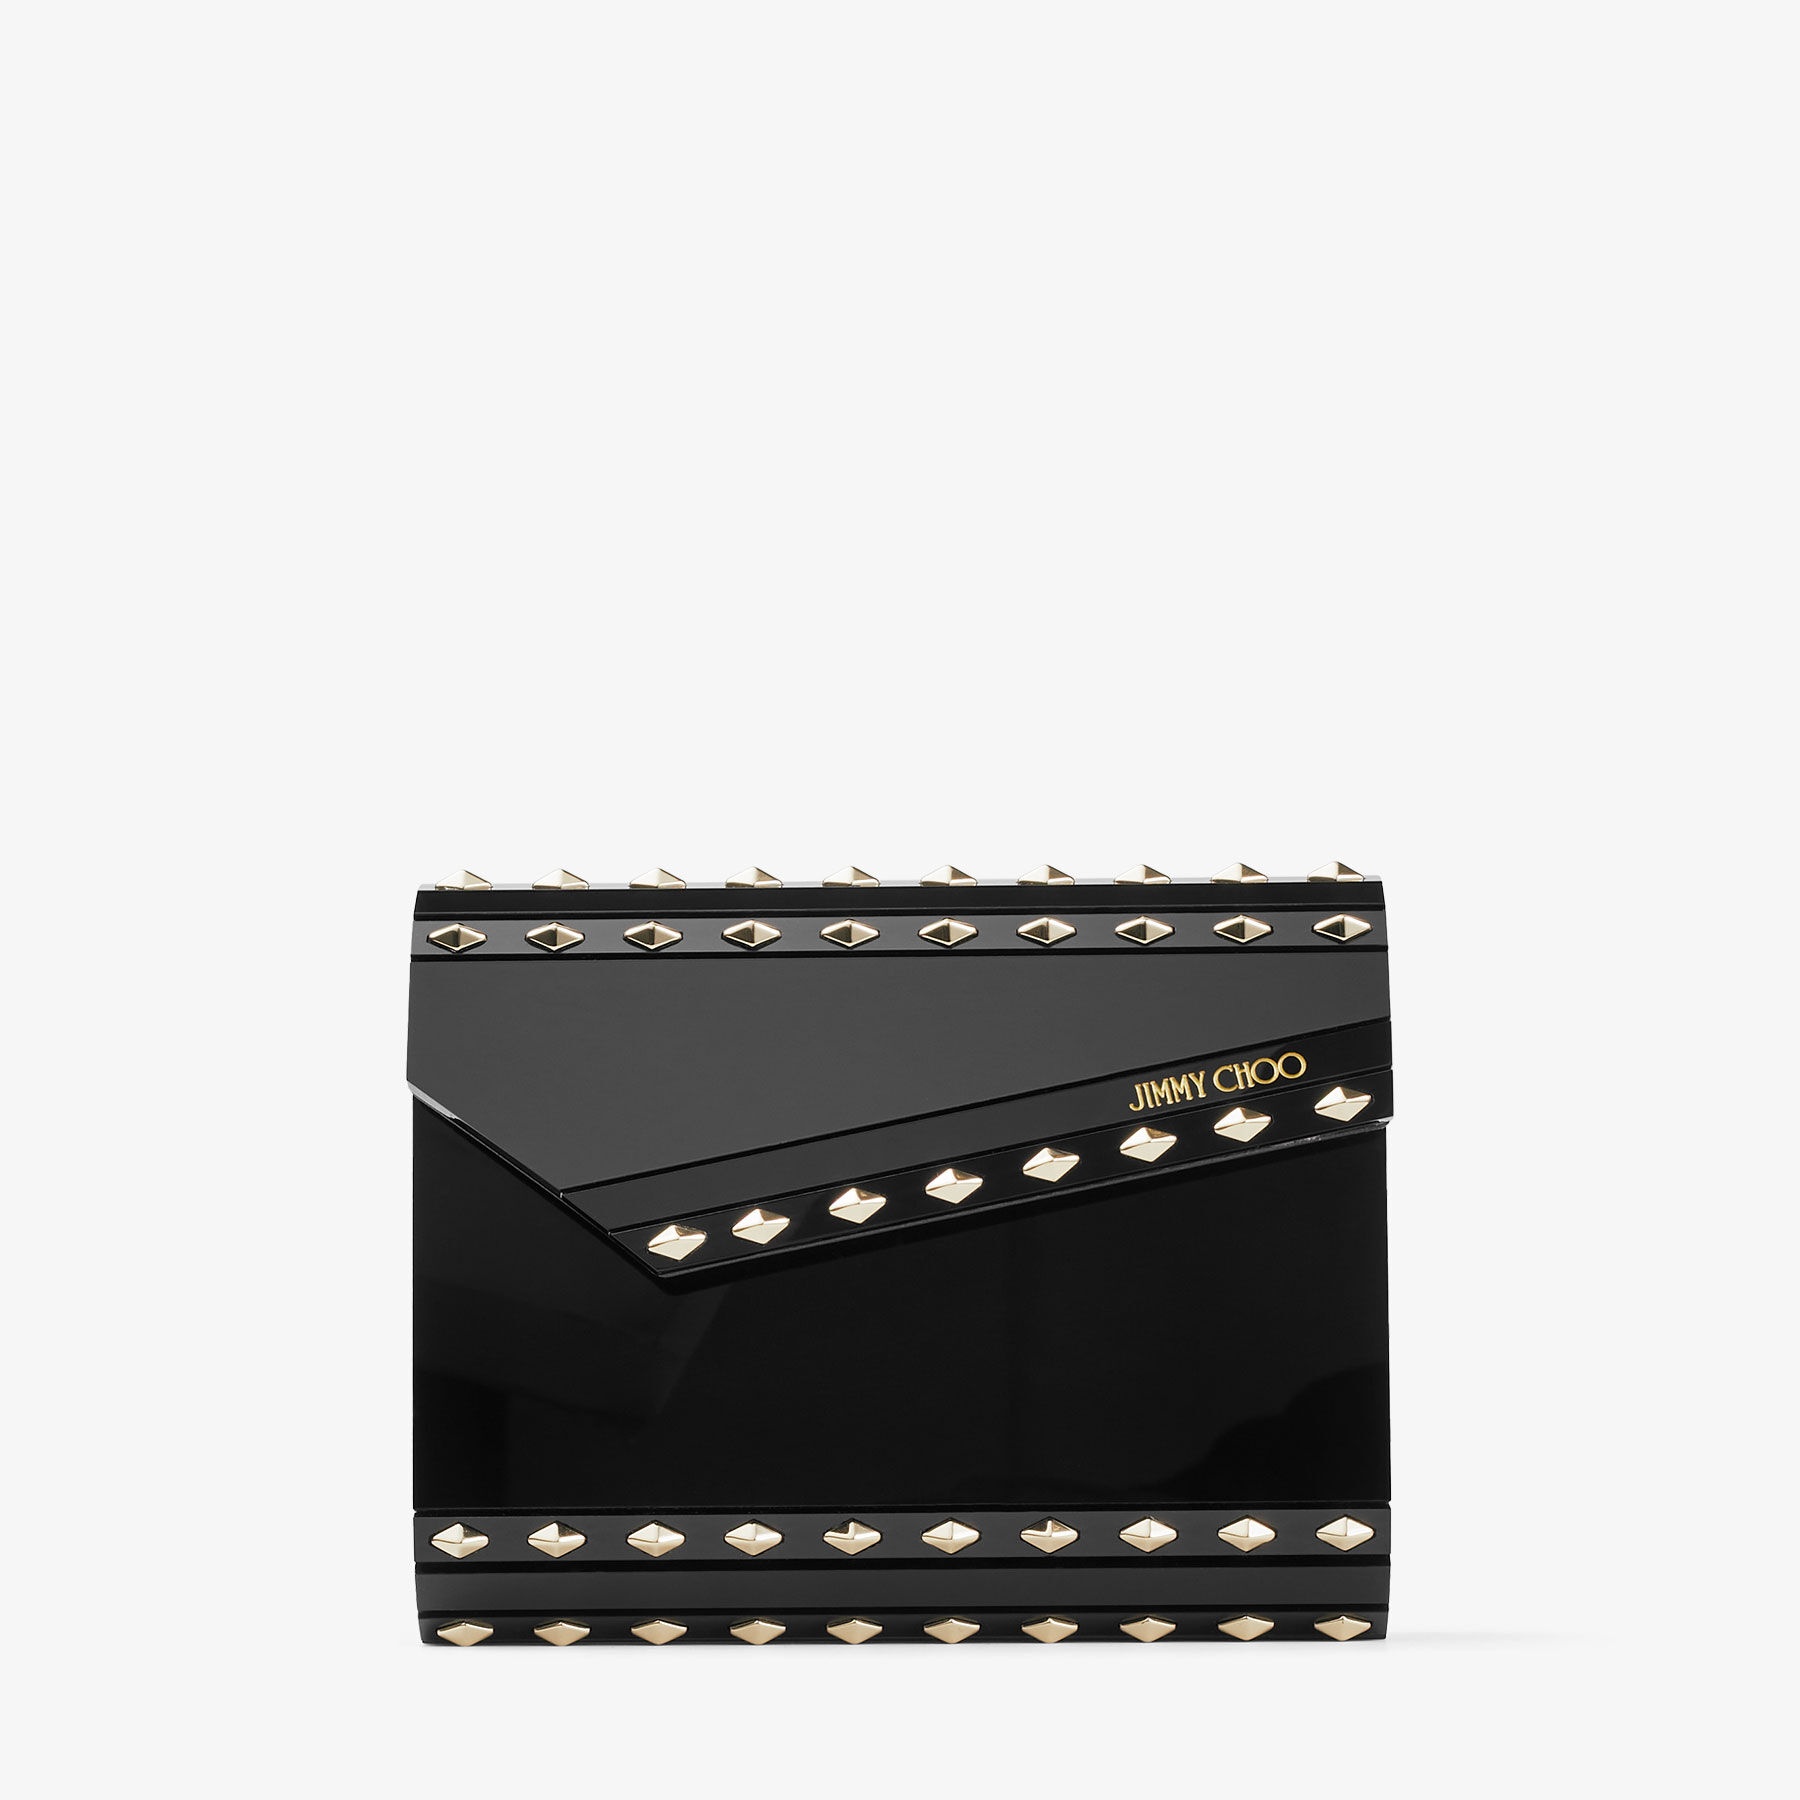 Candy
Black Acrylic Clutch Bag with Studs - 1